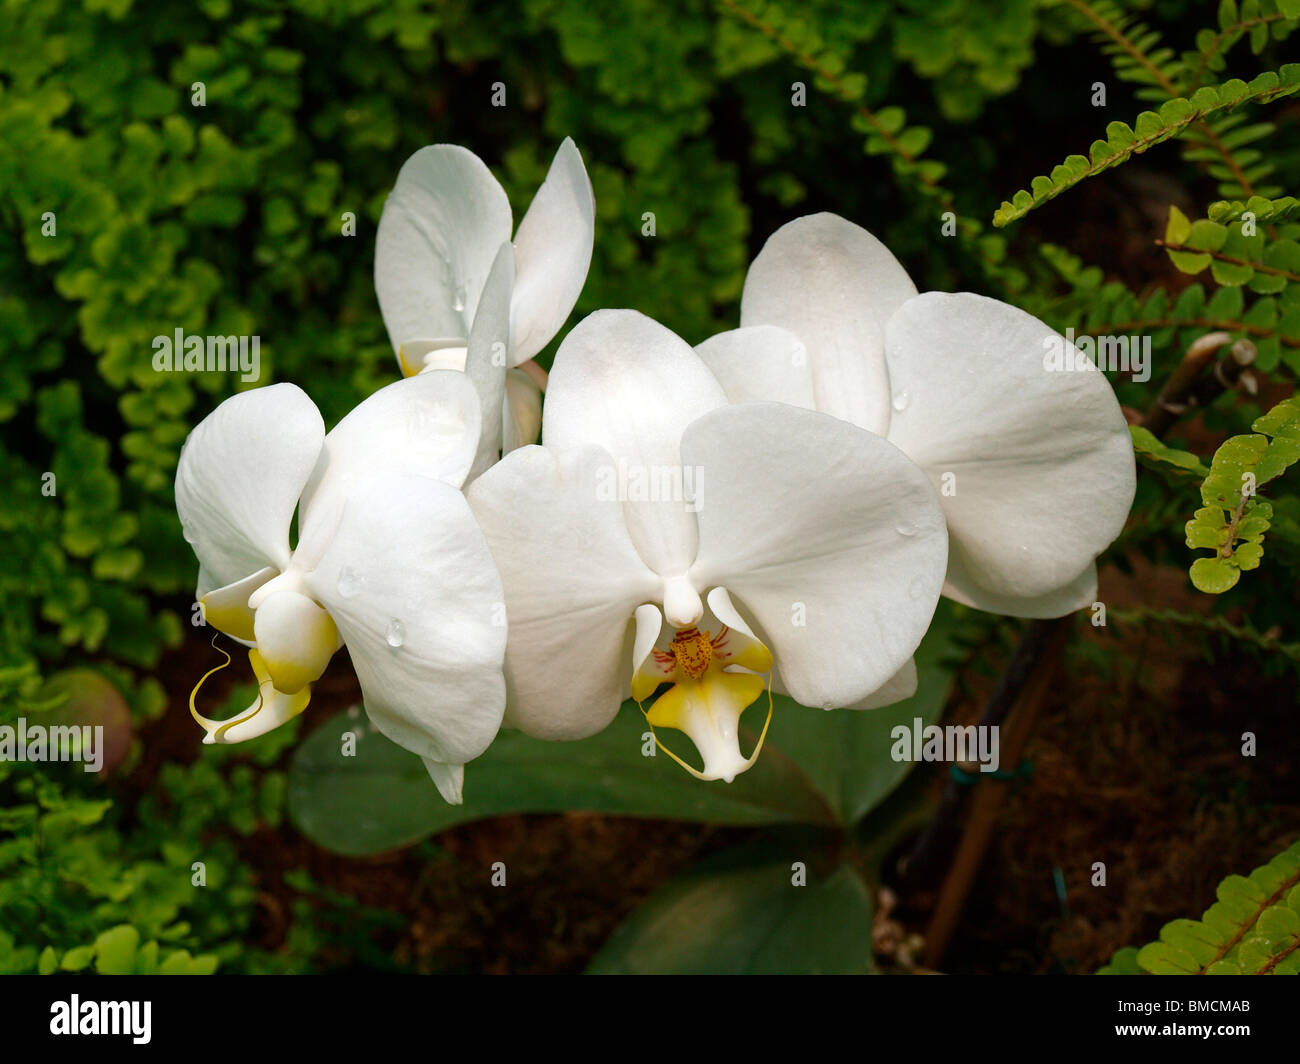 Doritaenopsis orchid. Doritaenopsis is a moth orchid hybrid, a cross with a Phaleanopsis and a Doritis. Stock Photo